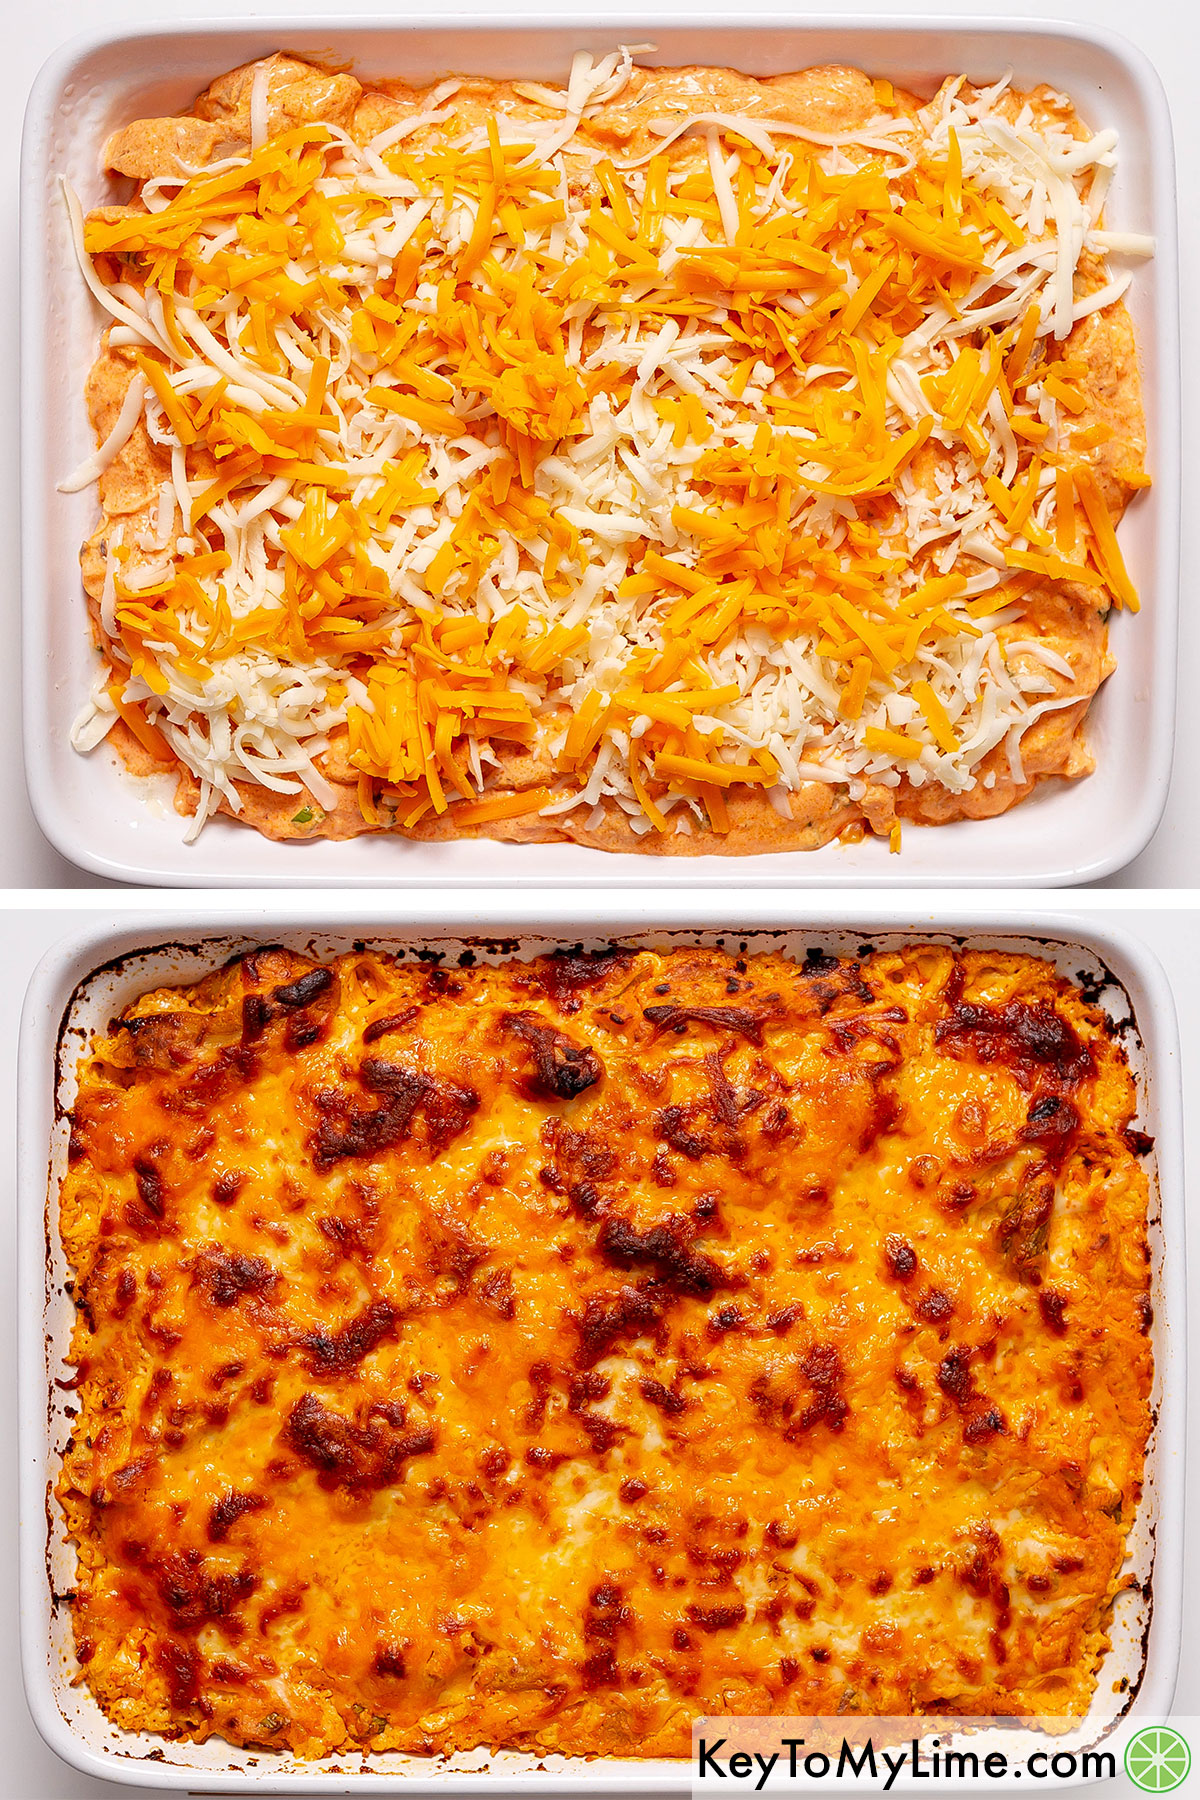 Adding shredded cheese on top of Buffalo dip, and then baking it.